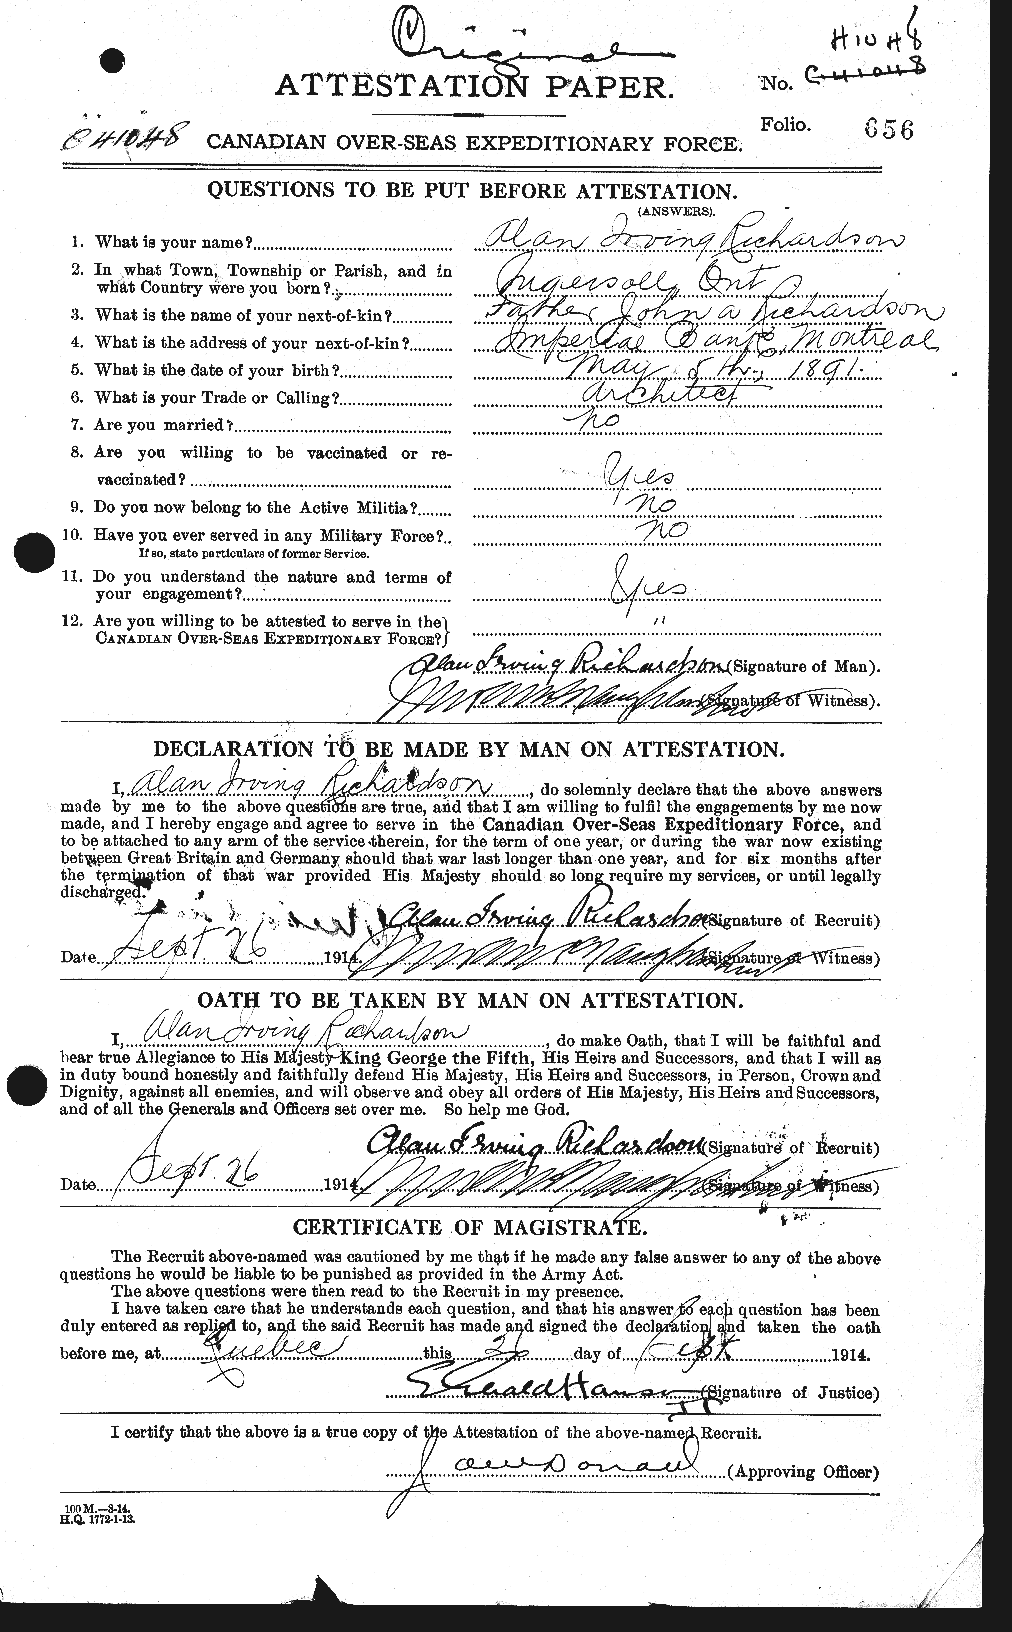 Personnel Records of the First World War - CEF 603466a